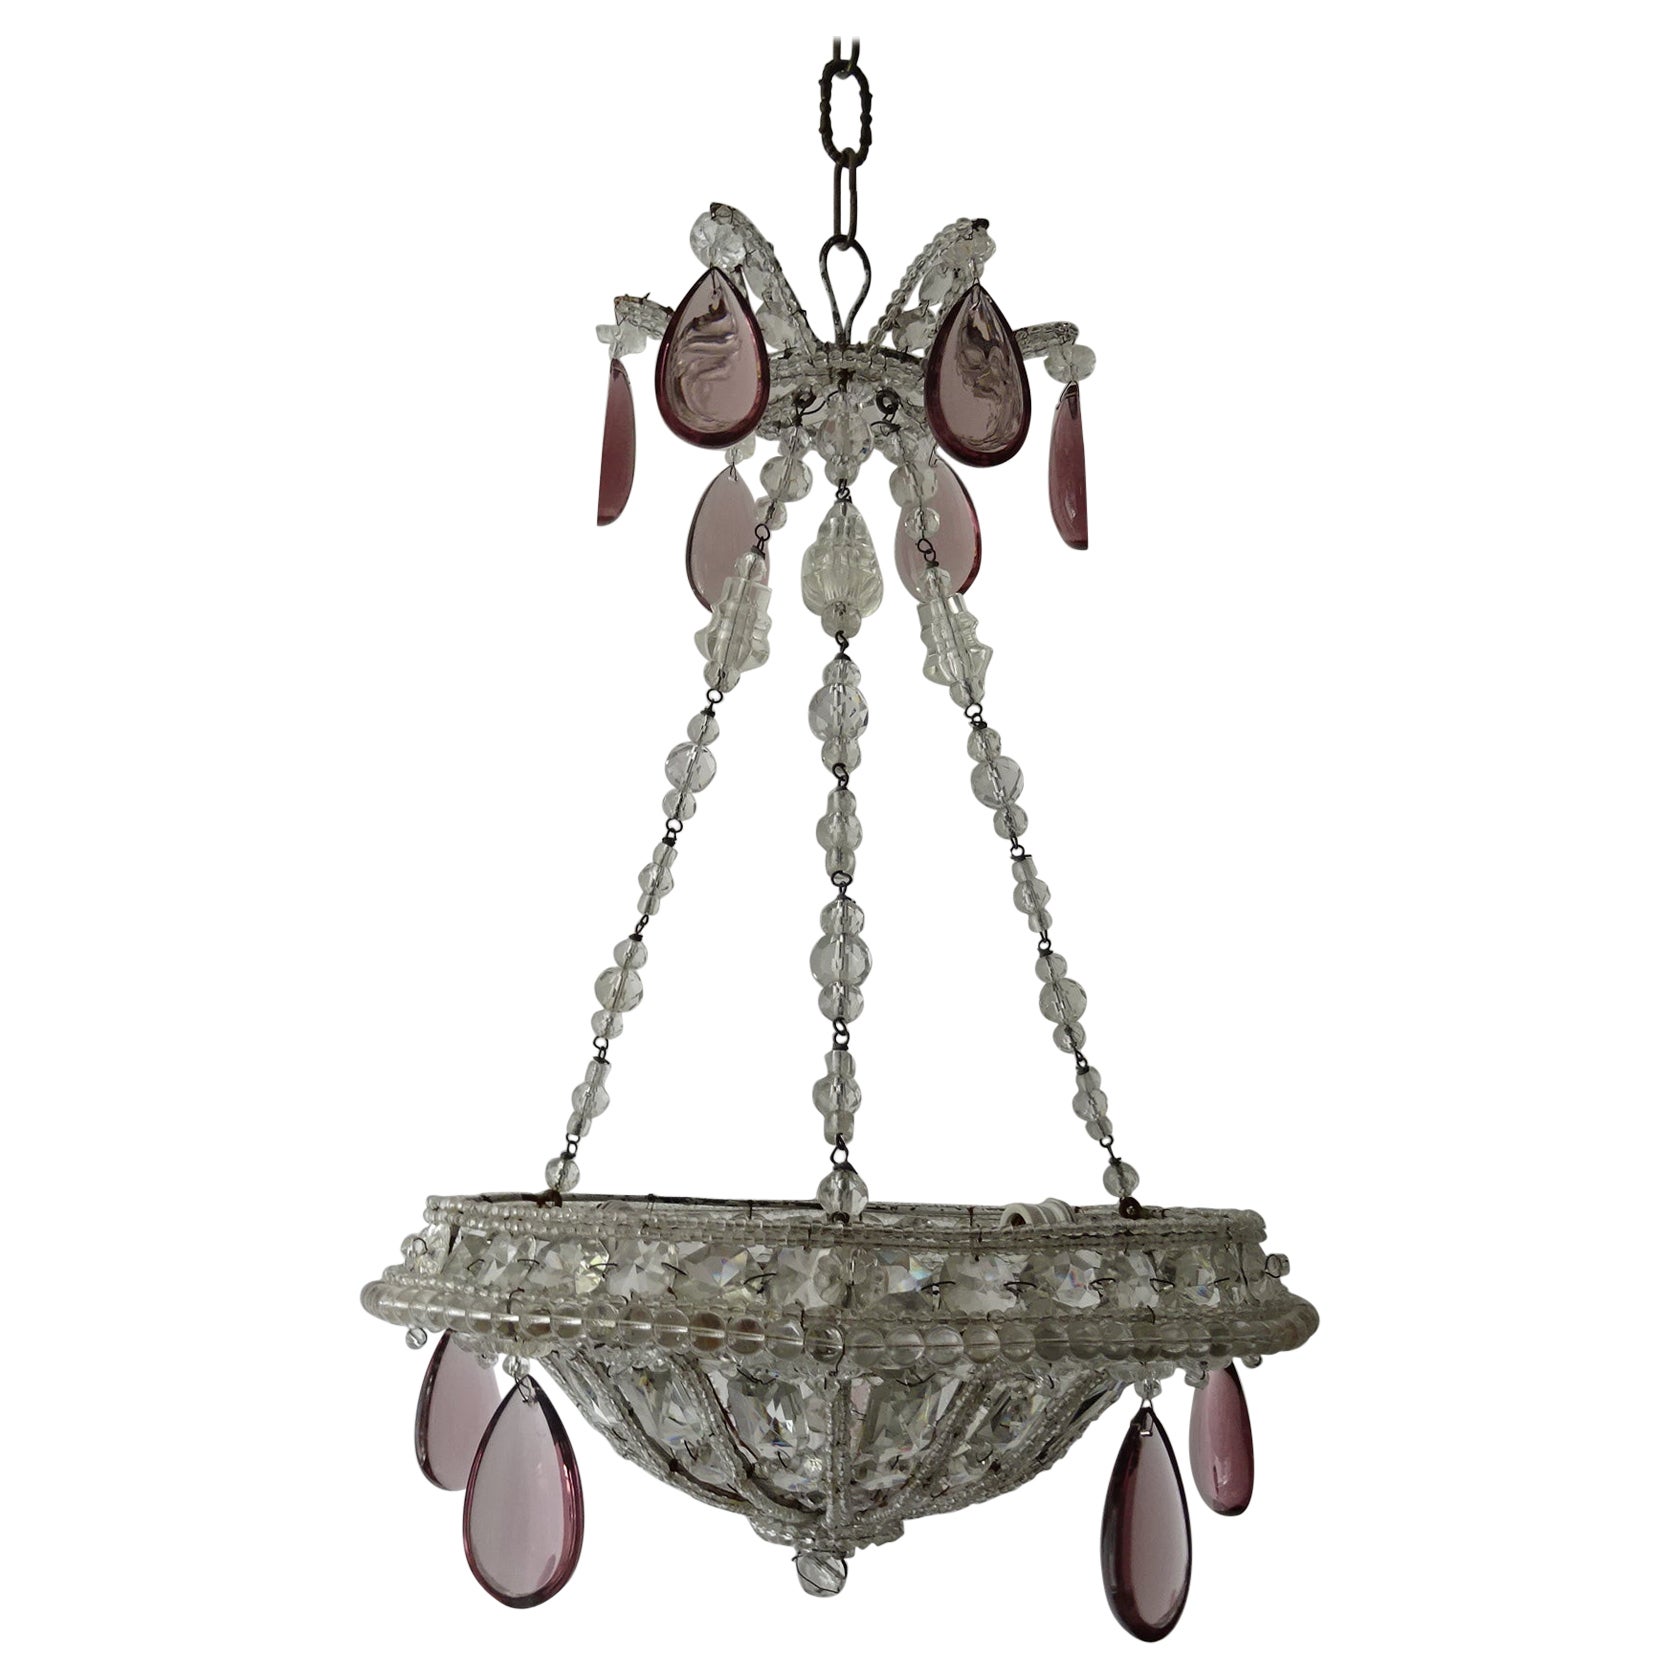  Maison 1940s Baguès Amethyst Prisms Beaded Crystal Chains Signed Chandelier